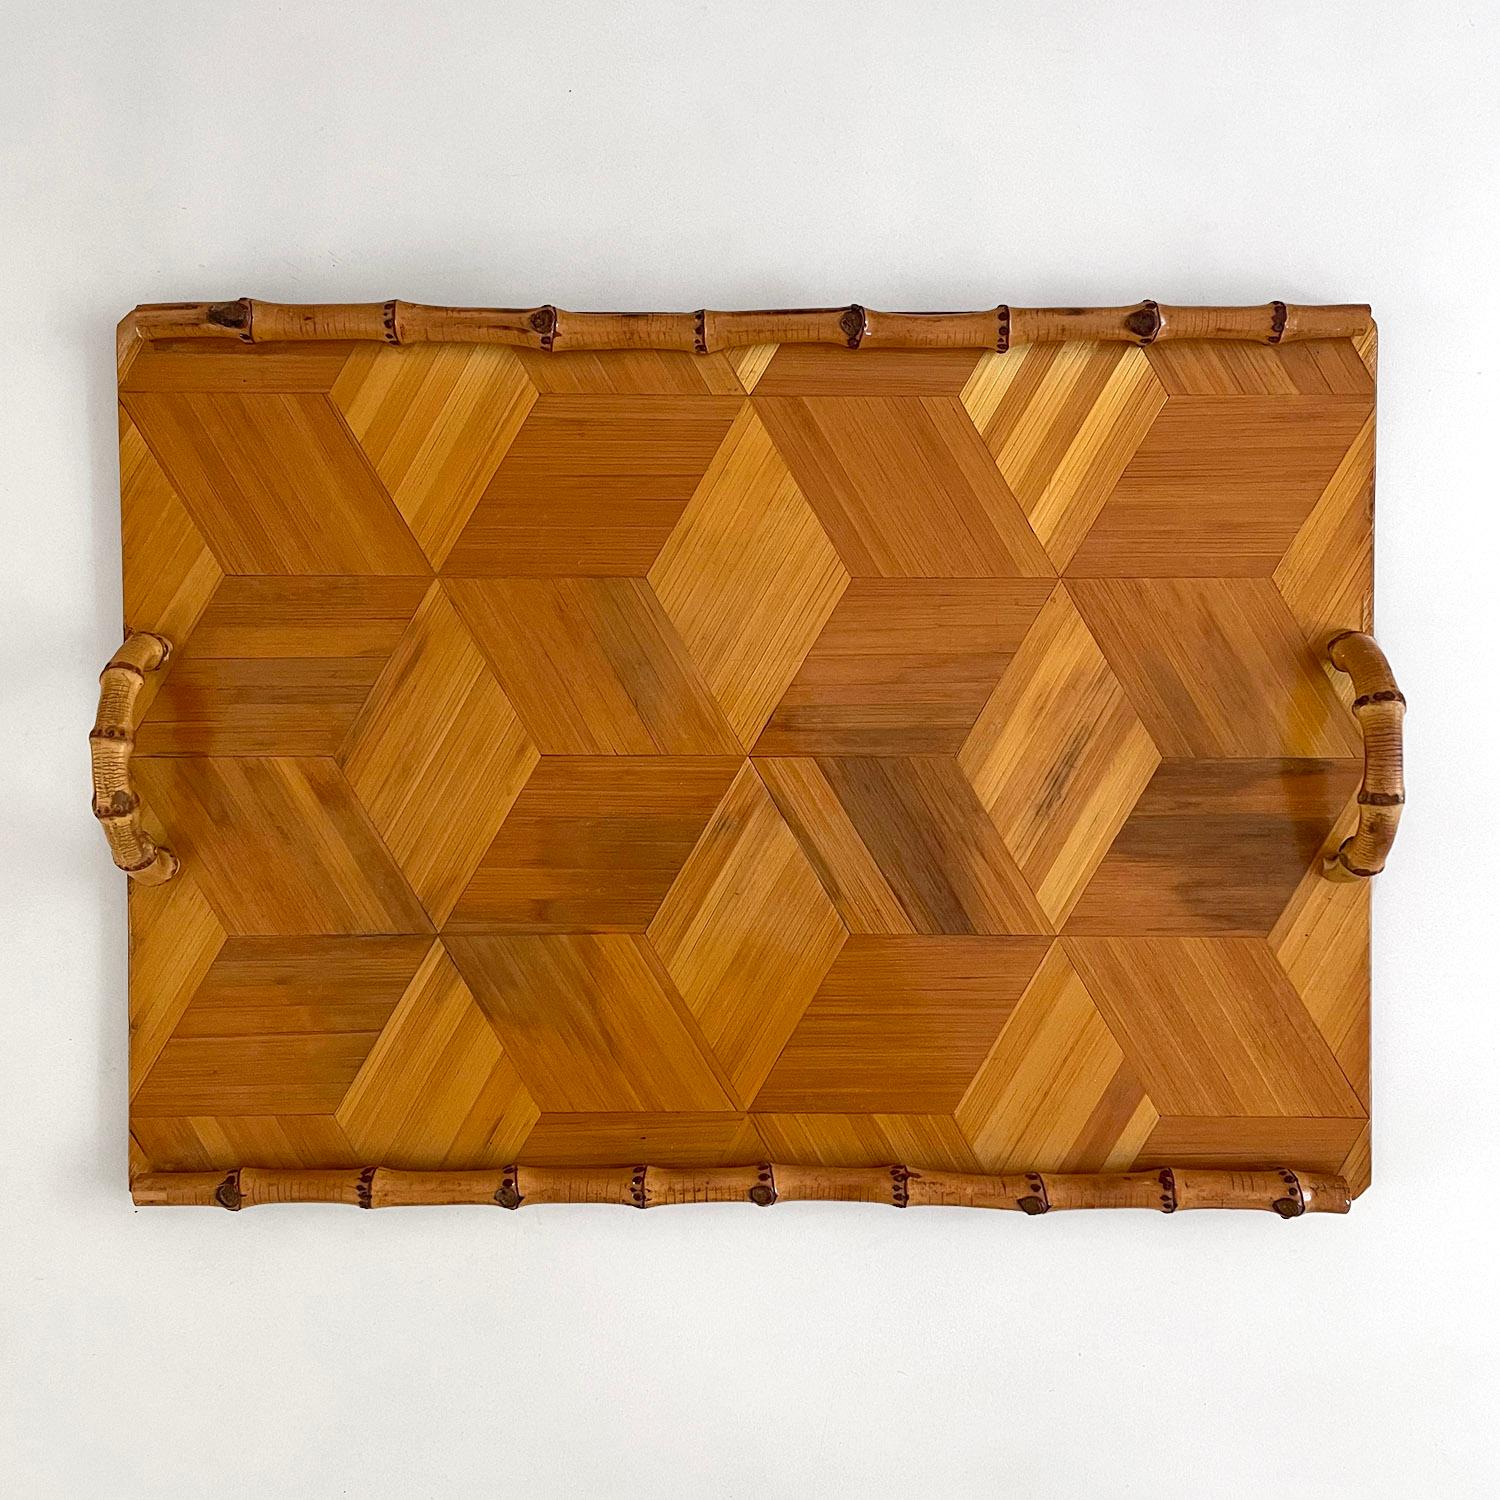 French wood marquetry tray with bamboo handles makes for the perfect service item or wonderful addition to any coffee table 
Natural color variations throughout 
Rounded bamboo trim and curved half moon handles
Patina from age and use
Timeless